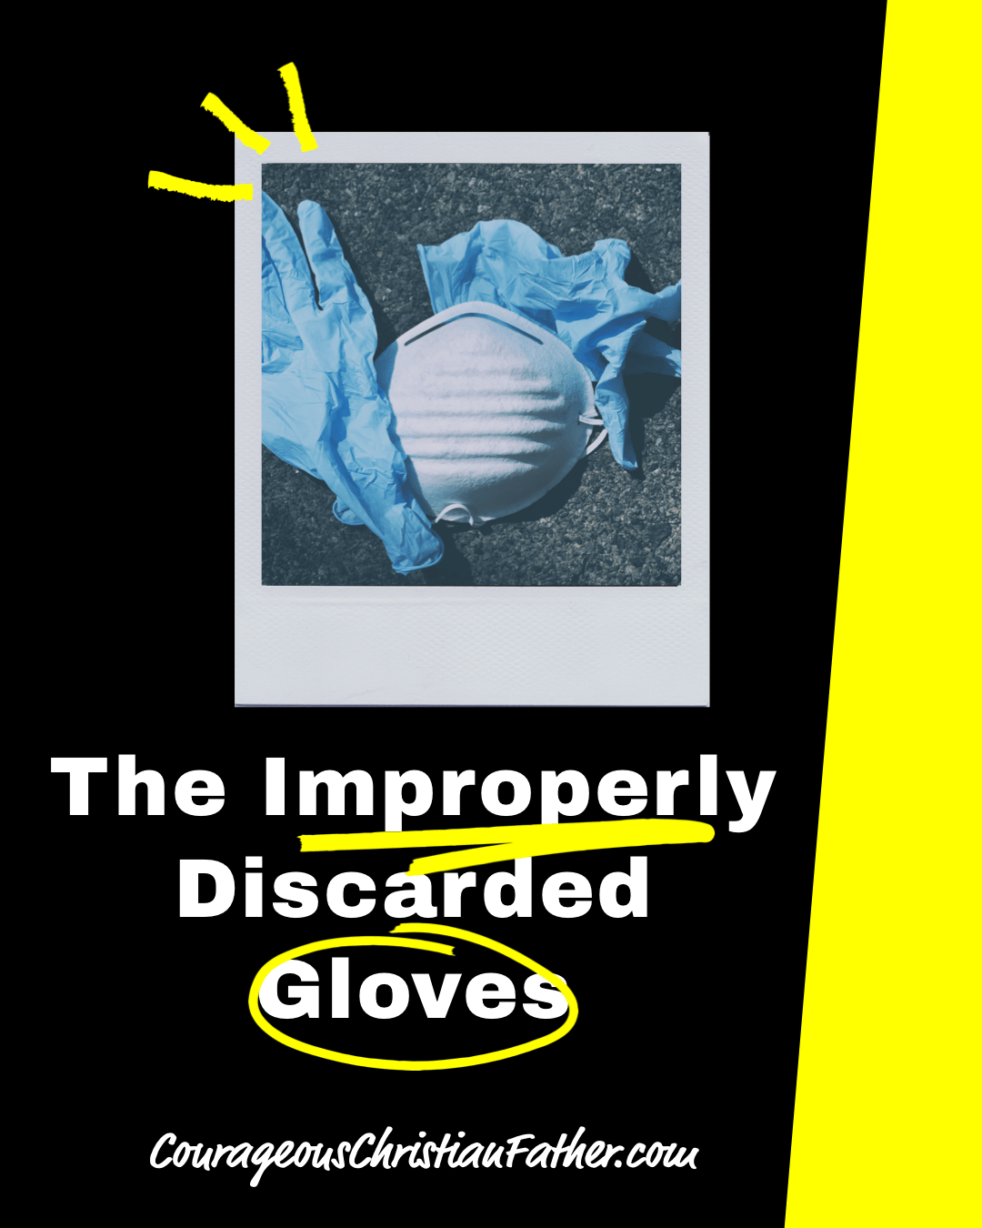 The Improperly Discarded Gloves, Face Mask - During this COVID-19 Coronavirus pandemic, people are wearing gloves and face masks and discarding them incorrectly. #Gloves #FaceMask